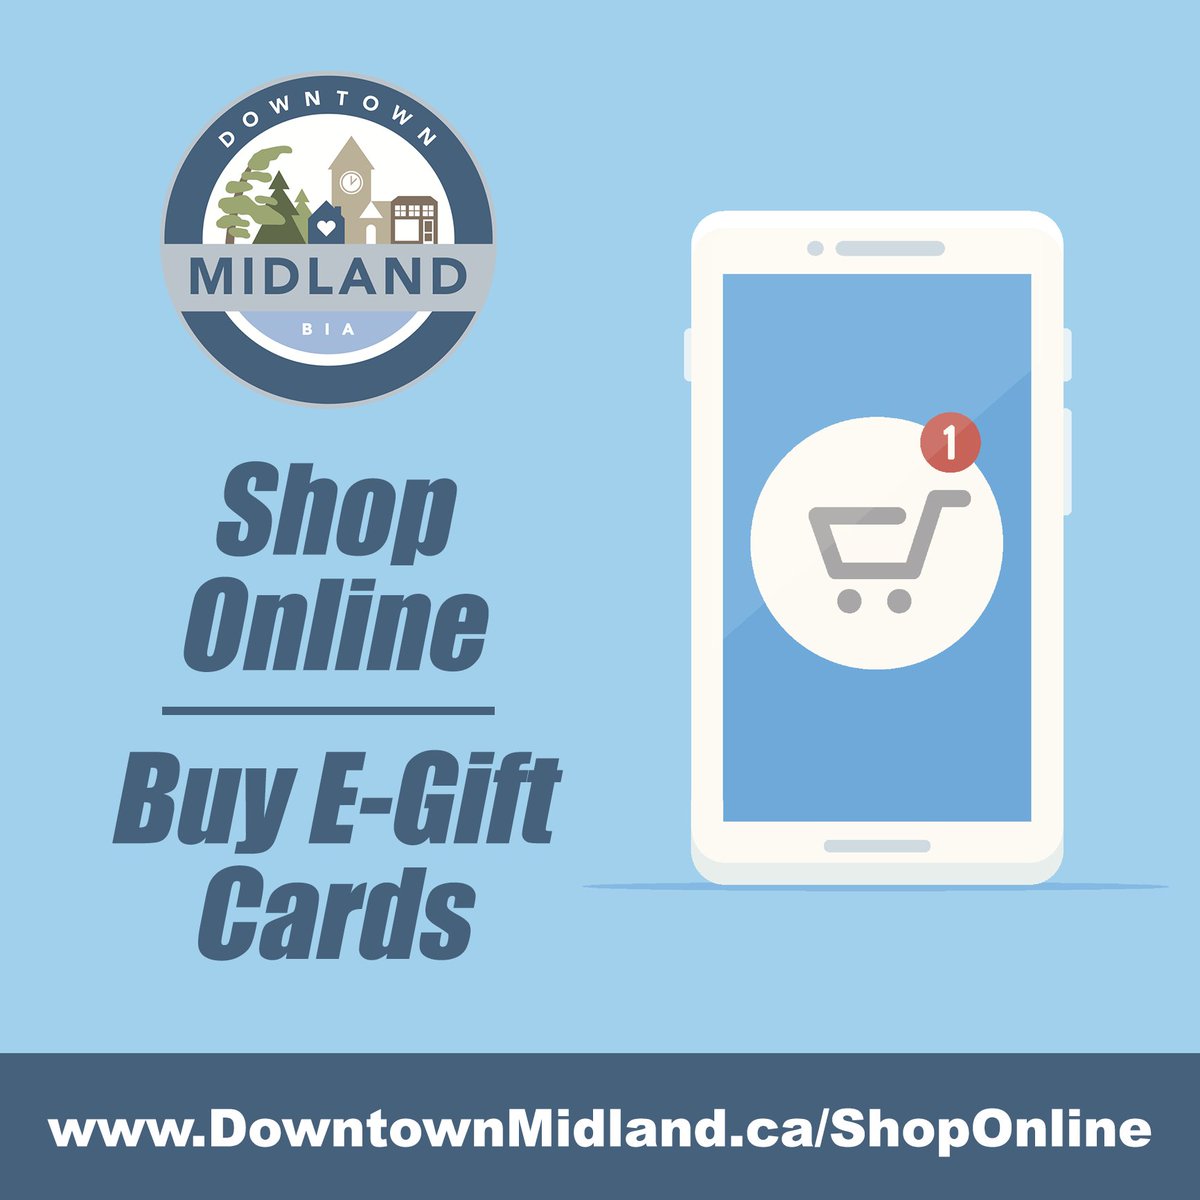 SHOP ONLINE & BUY E-GIFT CARDS: downtownmidland.ca/shoponline Shop at any business (online included) in the Downtown Midland Business Improvement Area (115+ businesses) from April 1st to April 30th for your chance to WIN $250 in Downtown Dollars: downtownmidland.ca/events